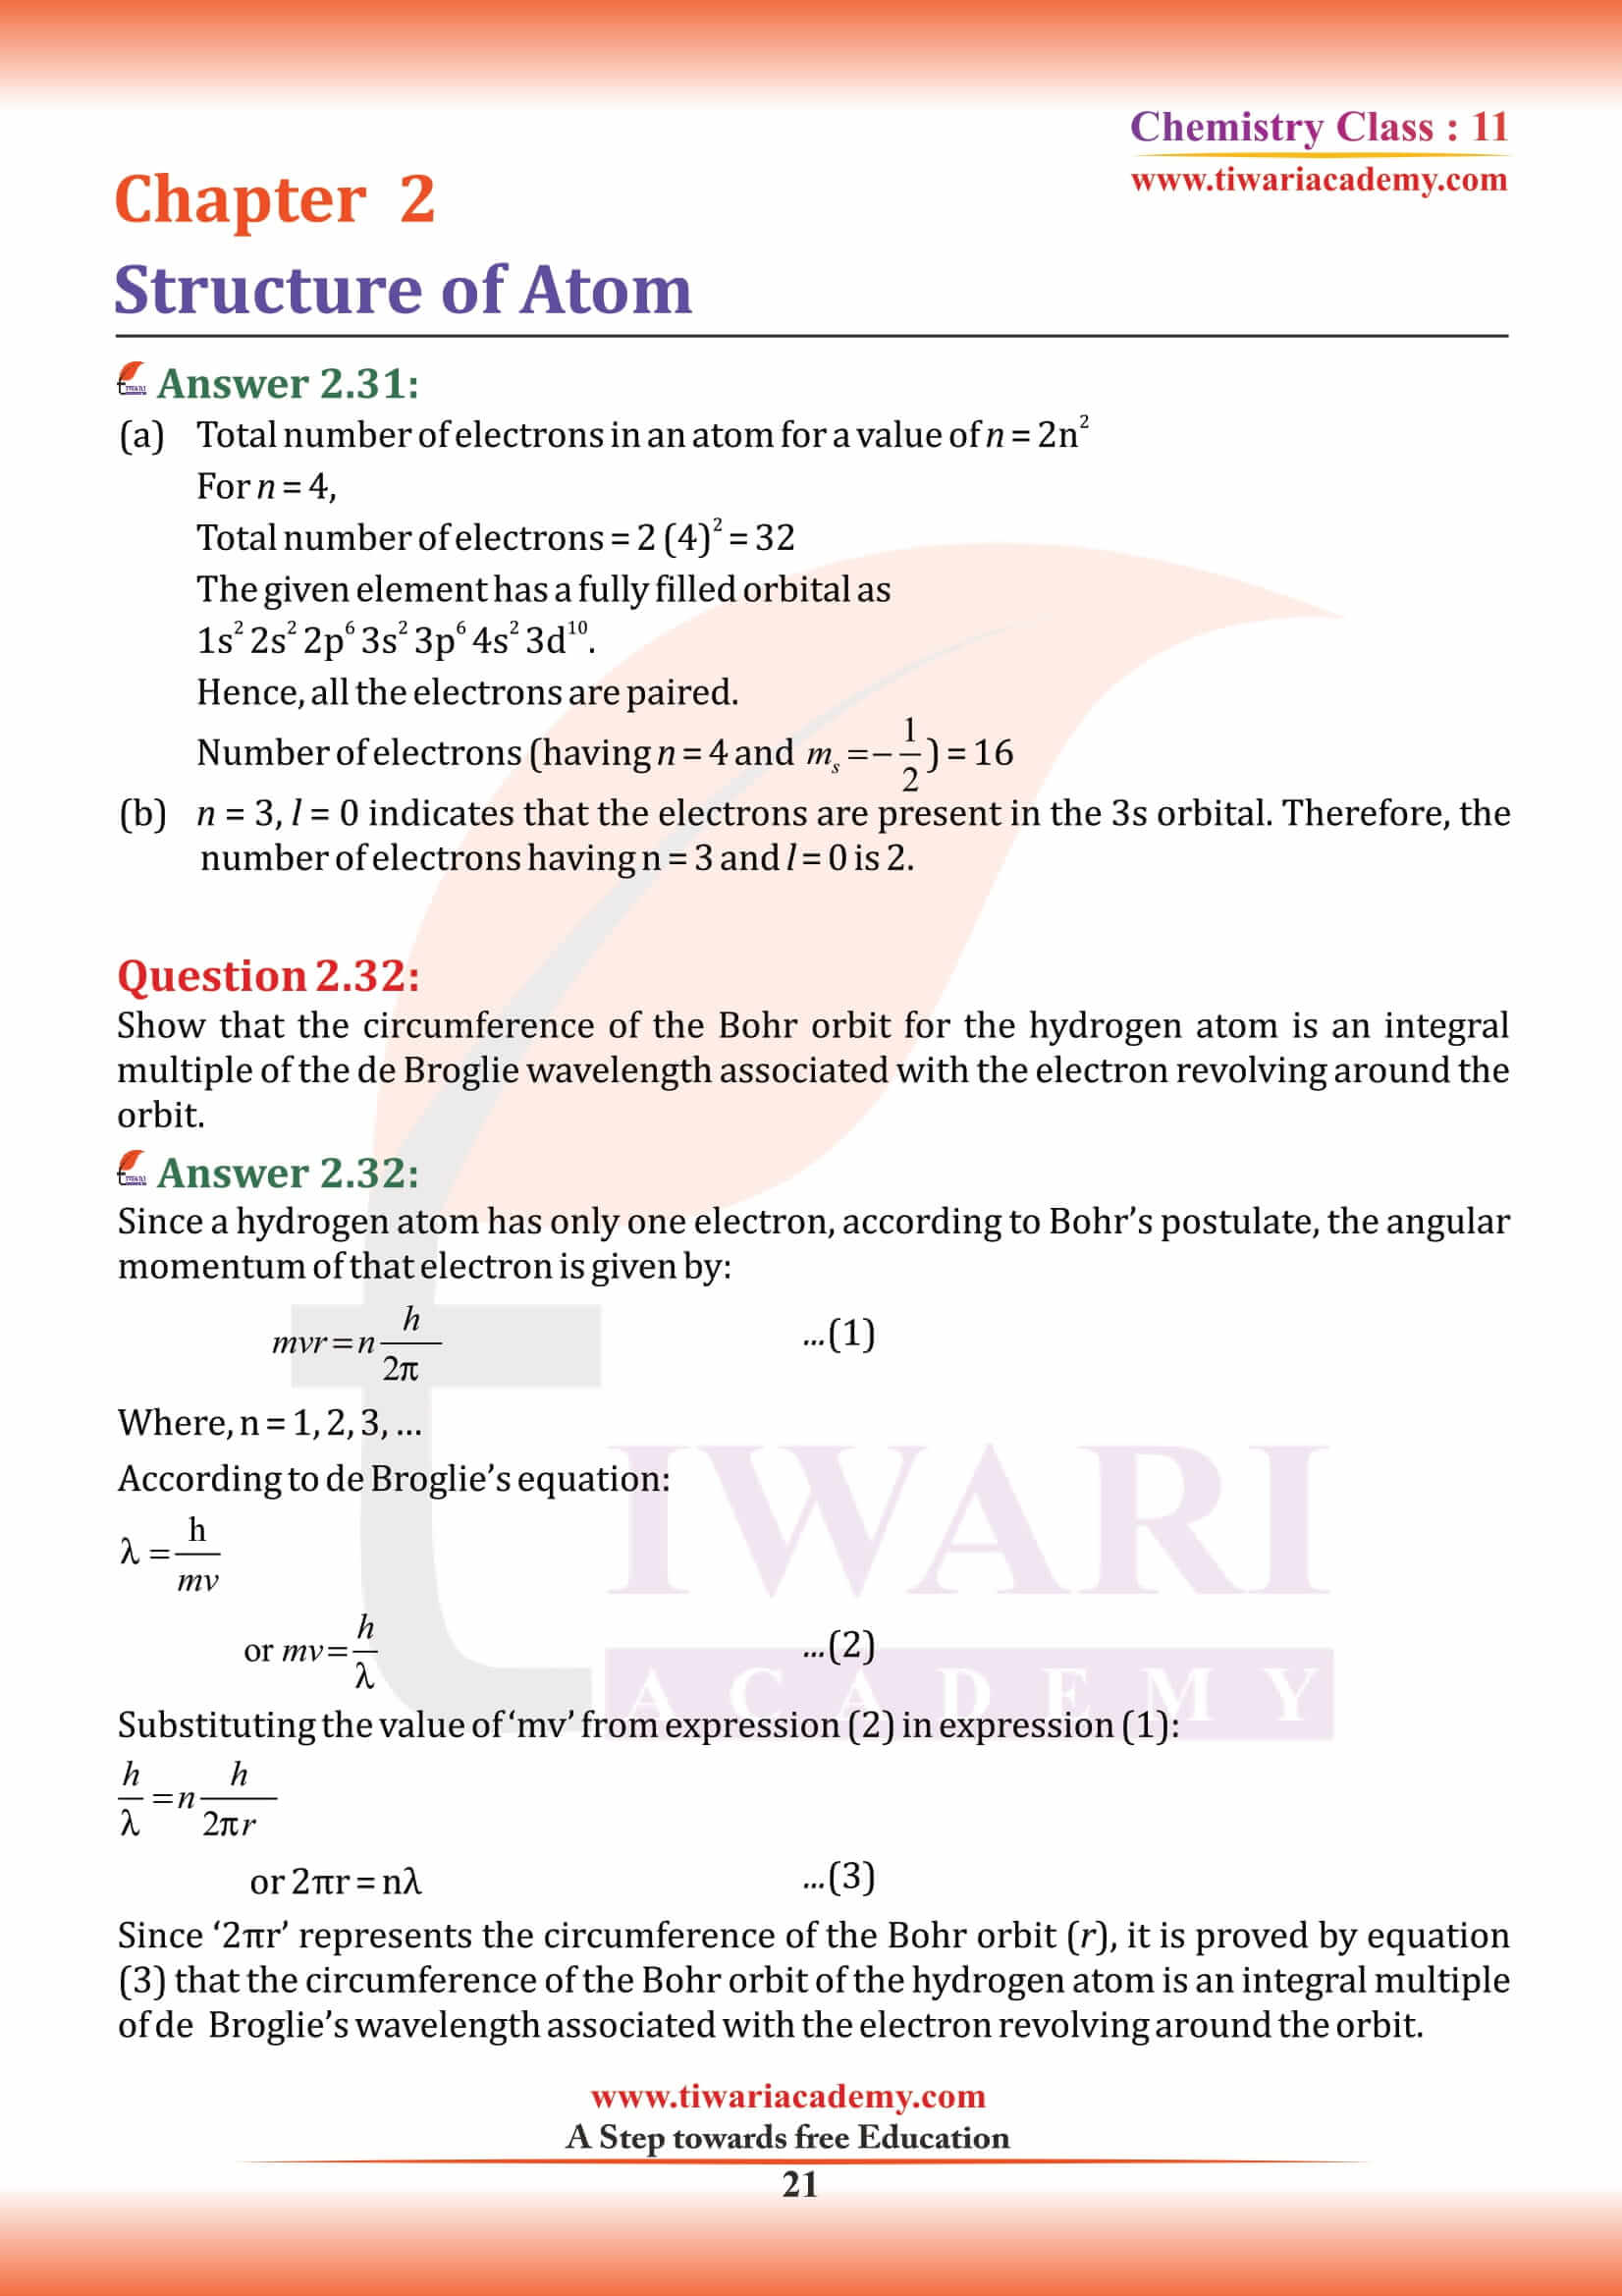 NCERT Solutions for Class 11 Chemistry Chapter 2 fee use